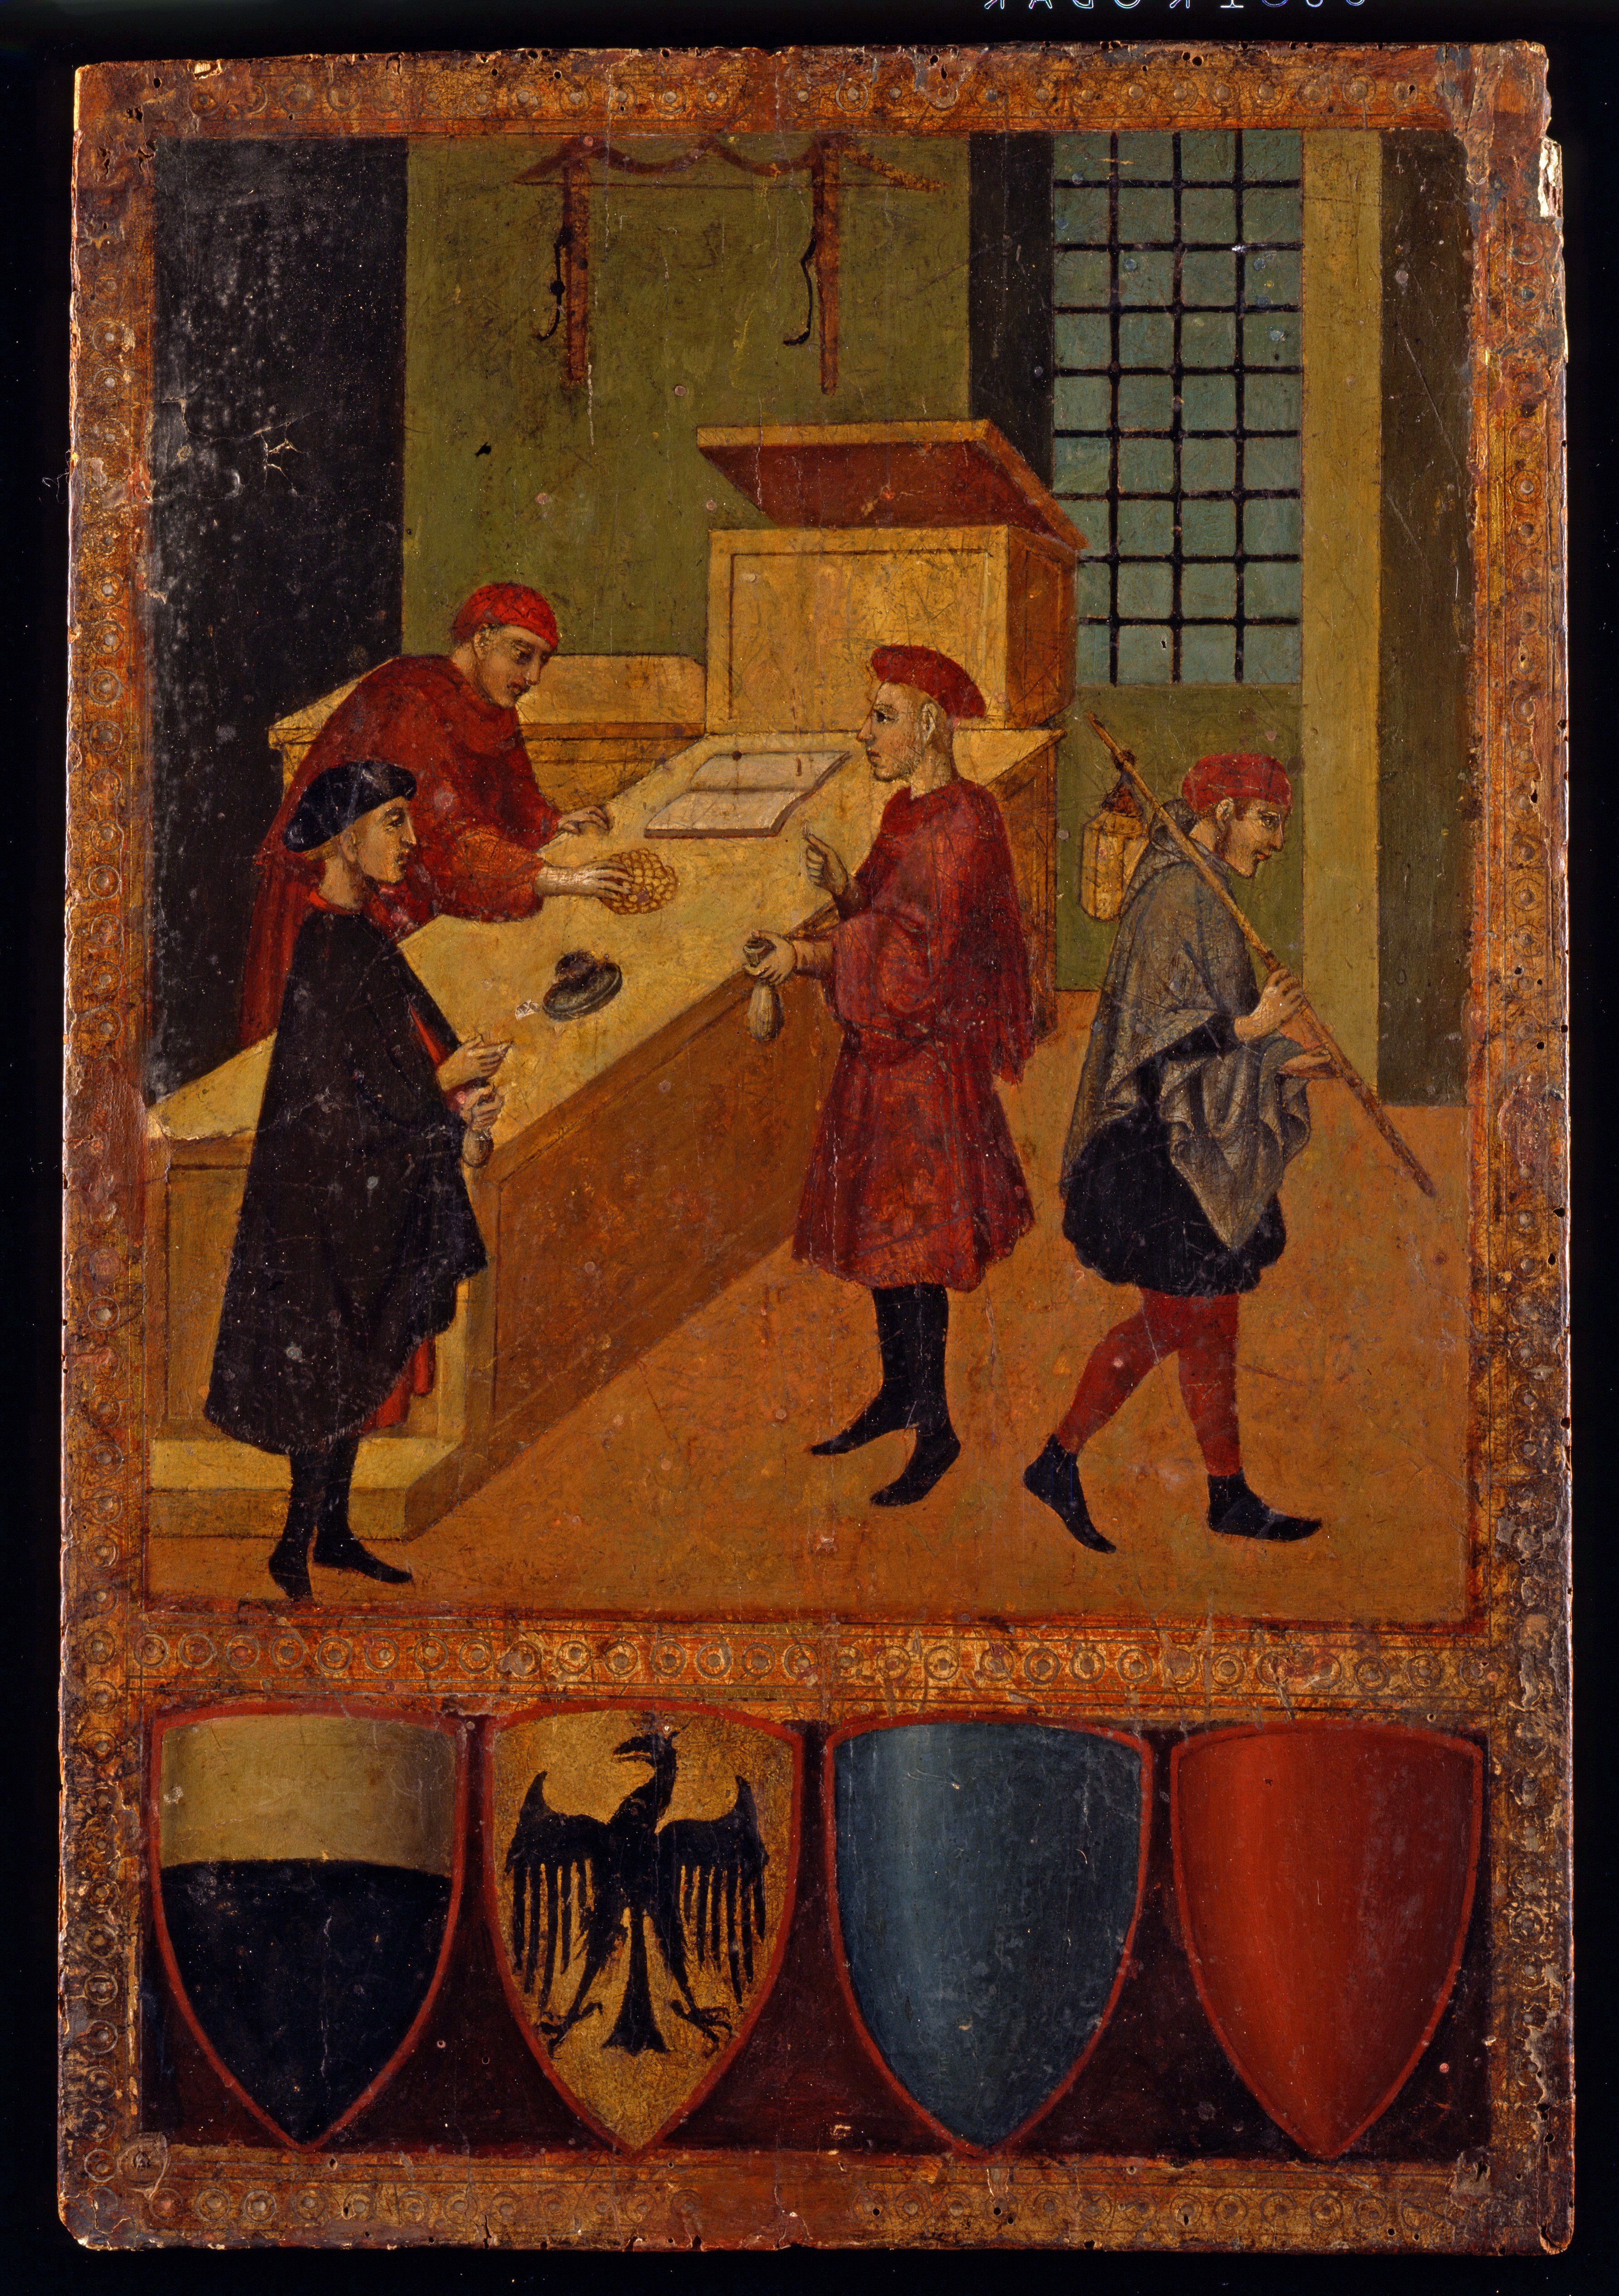 Wooden cover of a Biccherna register with a depiction of a merchant desk, last quarter of the 14th century (Siena State Archives, Biccherne).